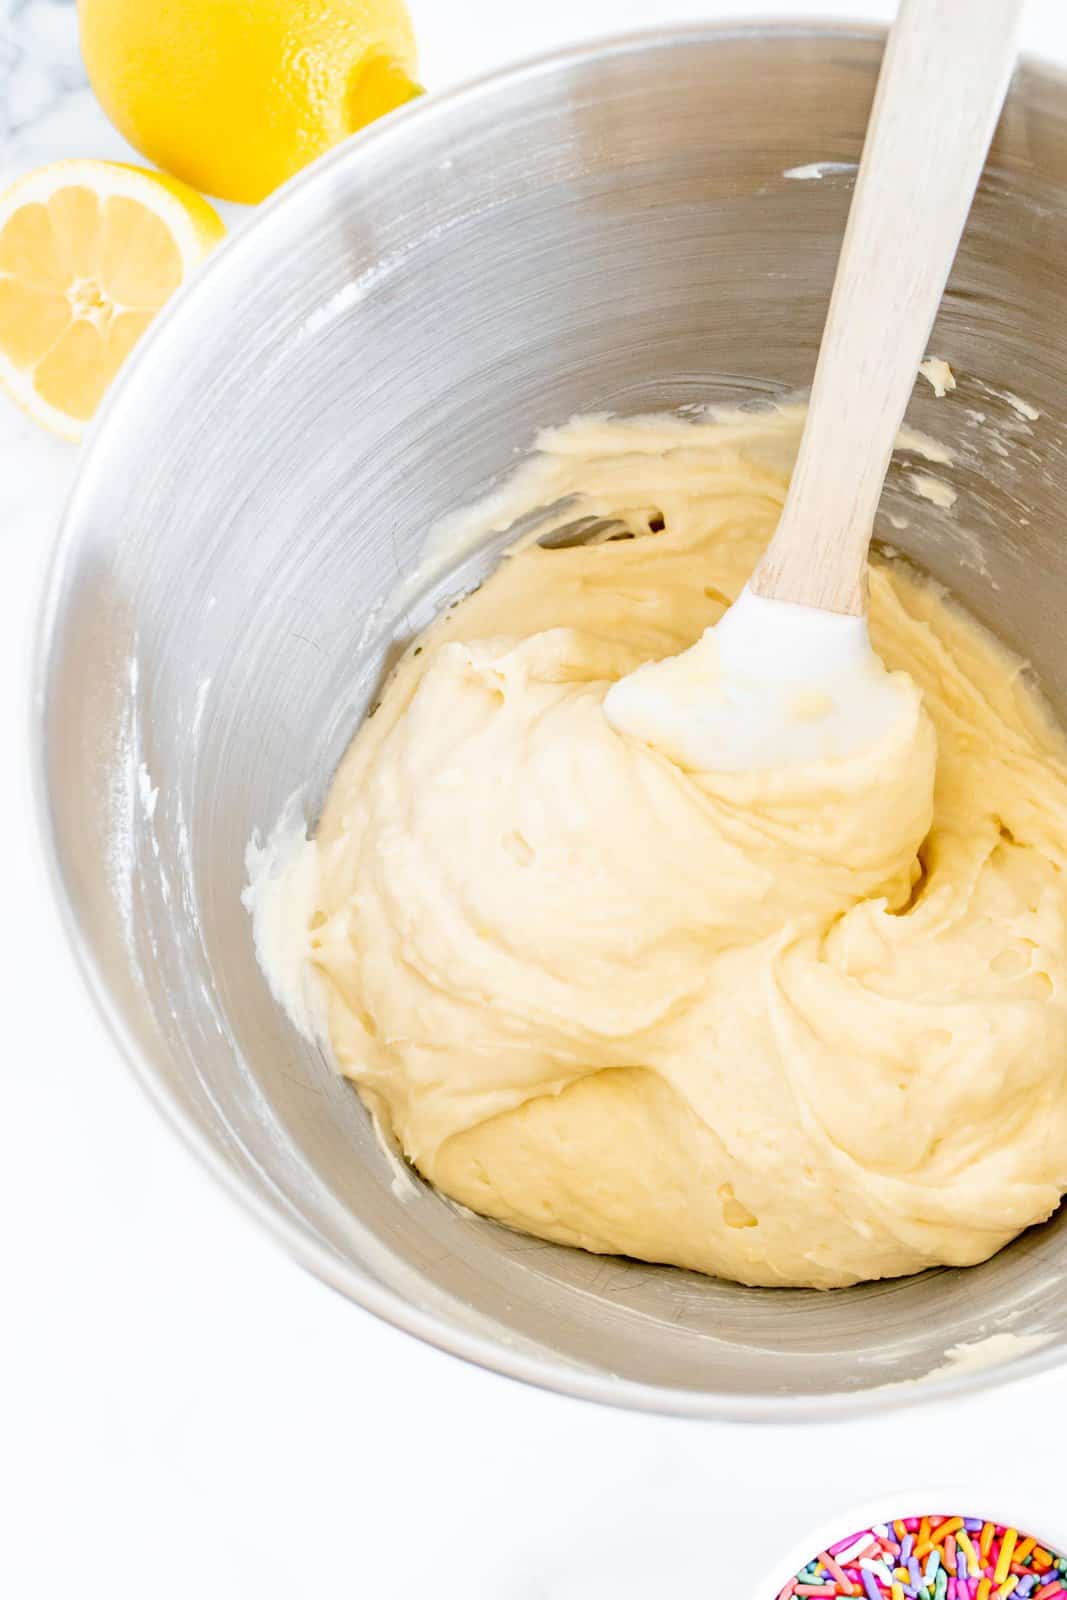 Cake batter mixed together in bowl of stand mixer.